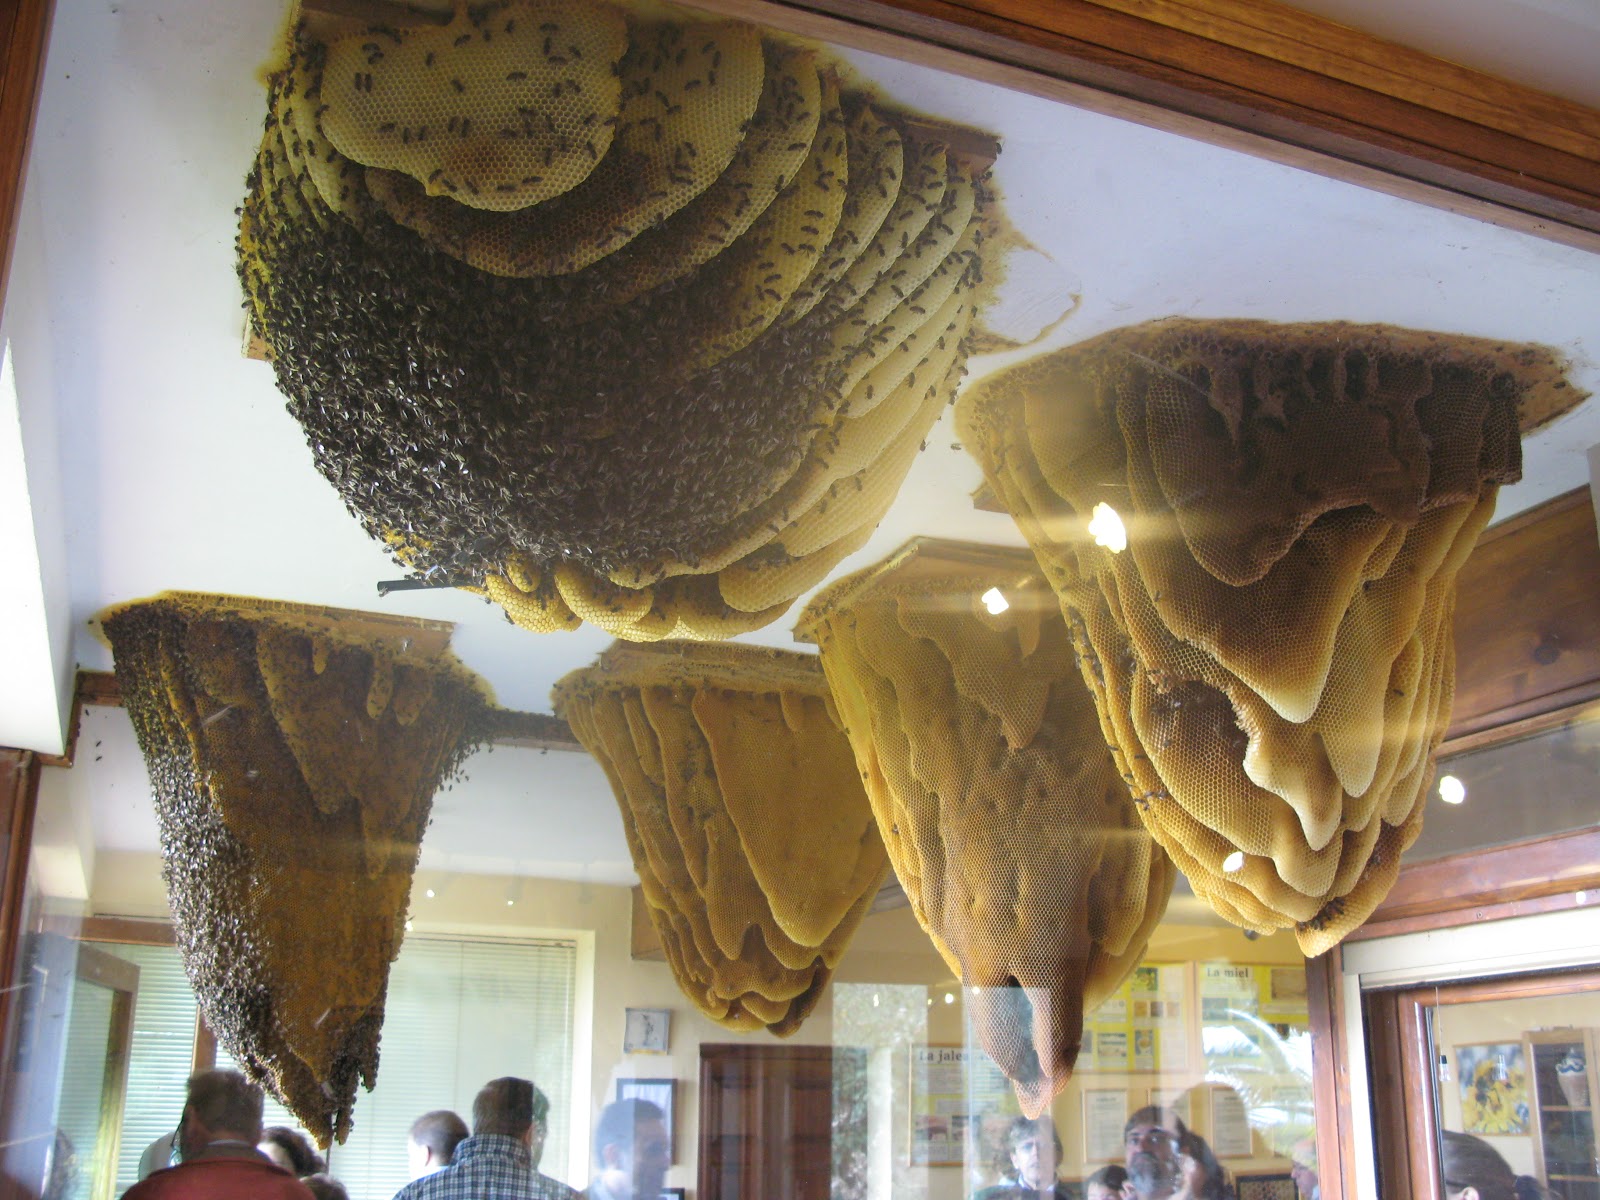 Giant Hives Hanging From The Ceiling Enclosed In A Glass Case With Outdoor Access